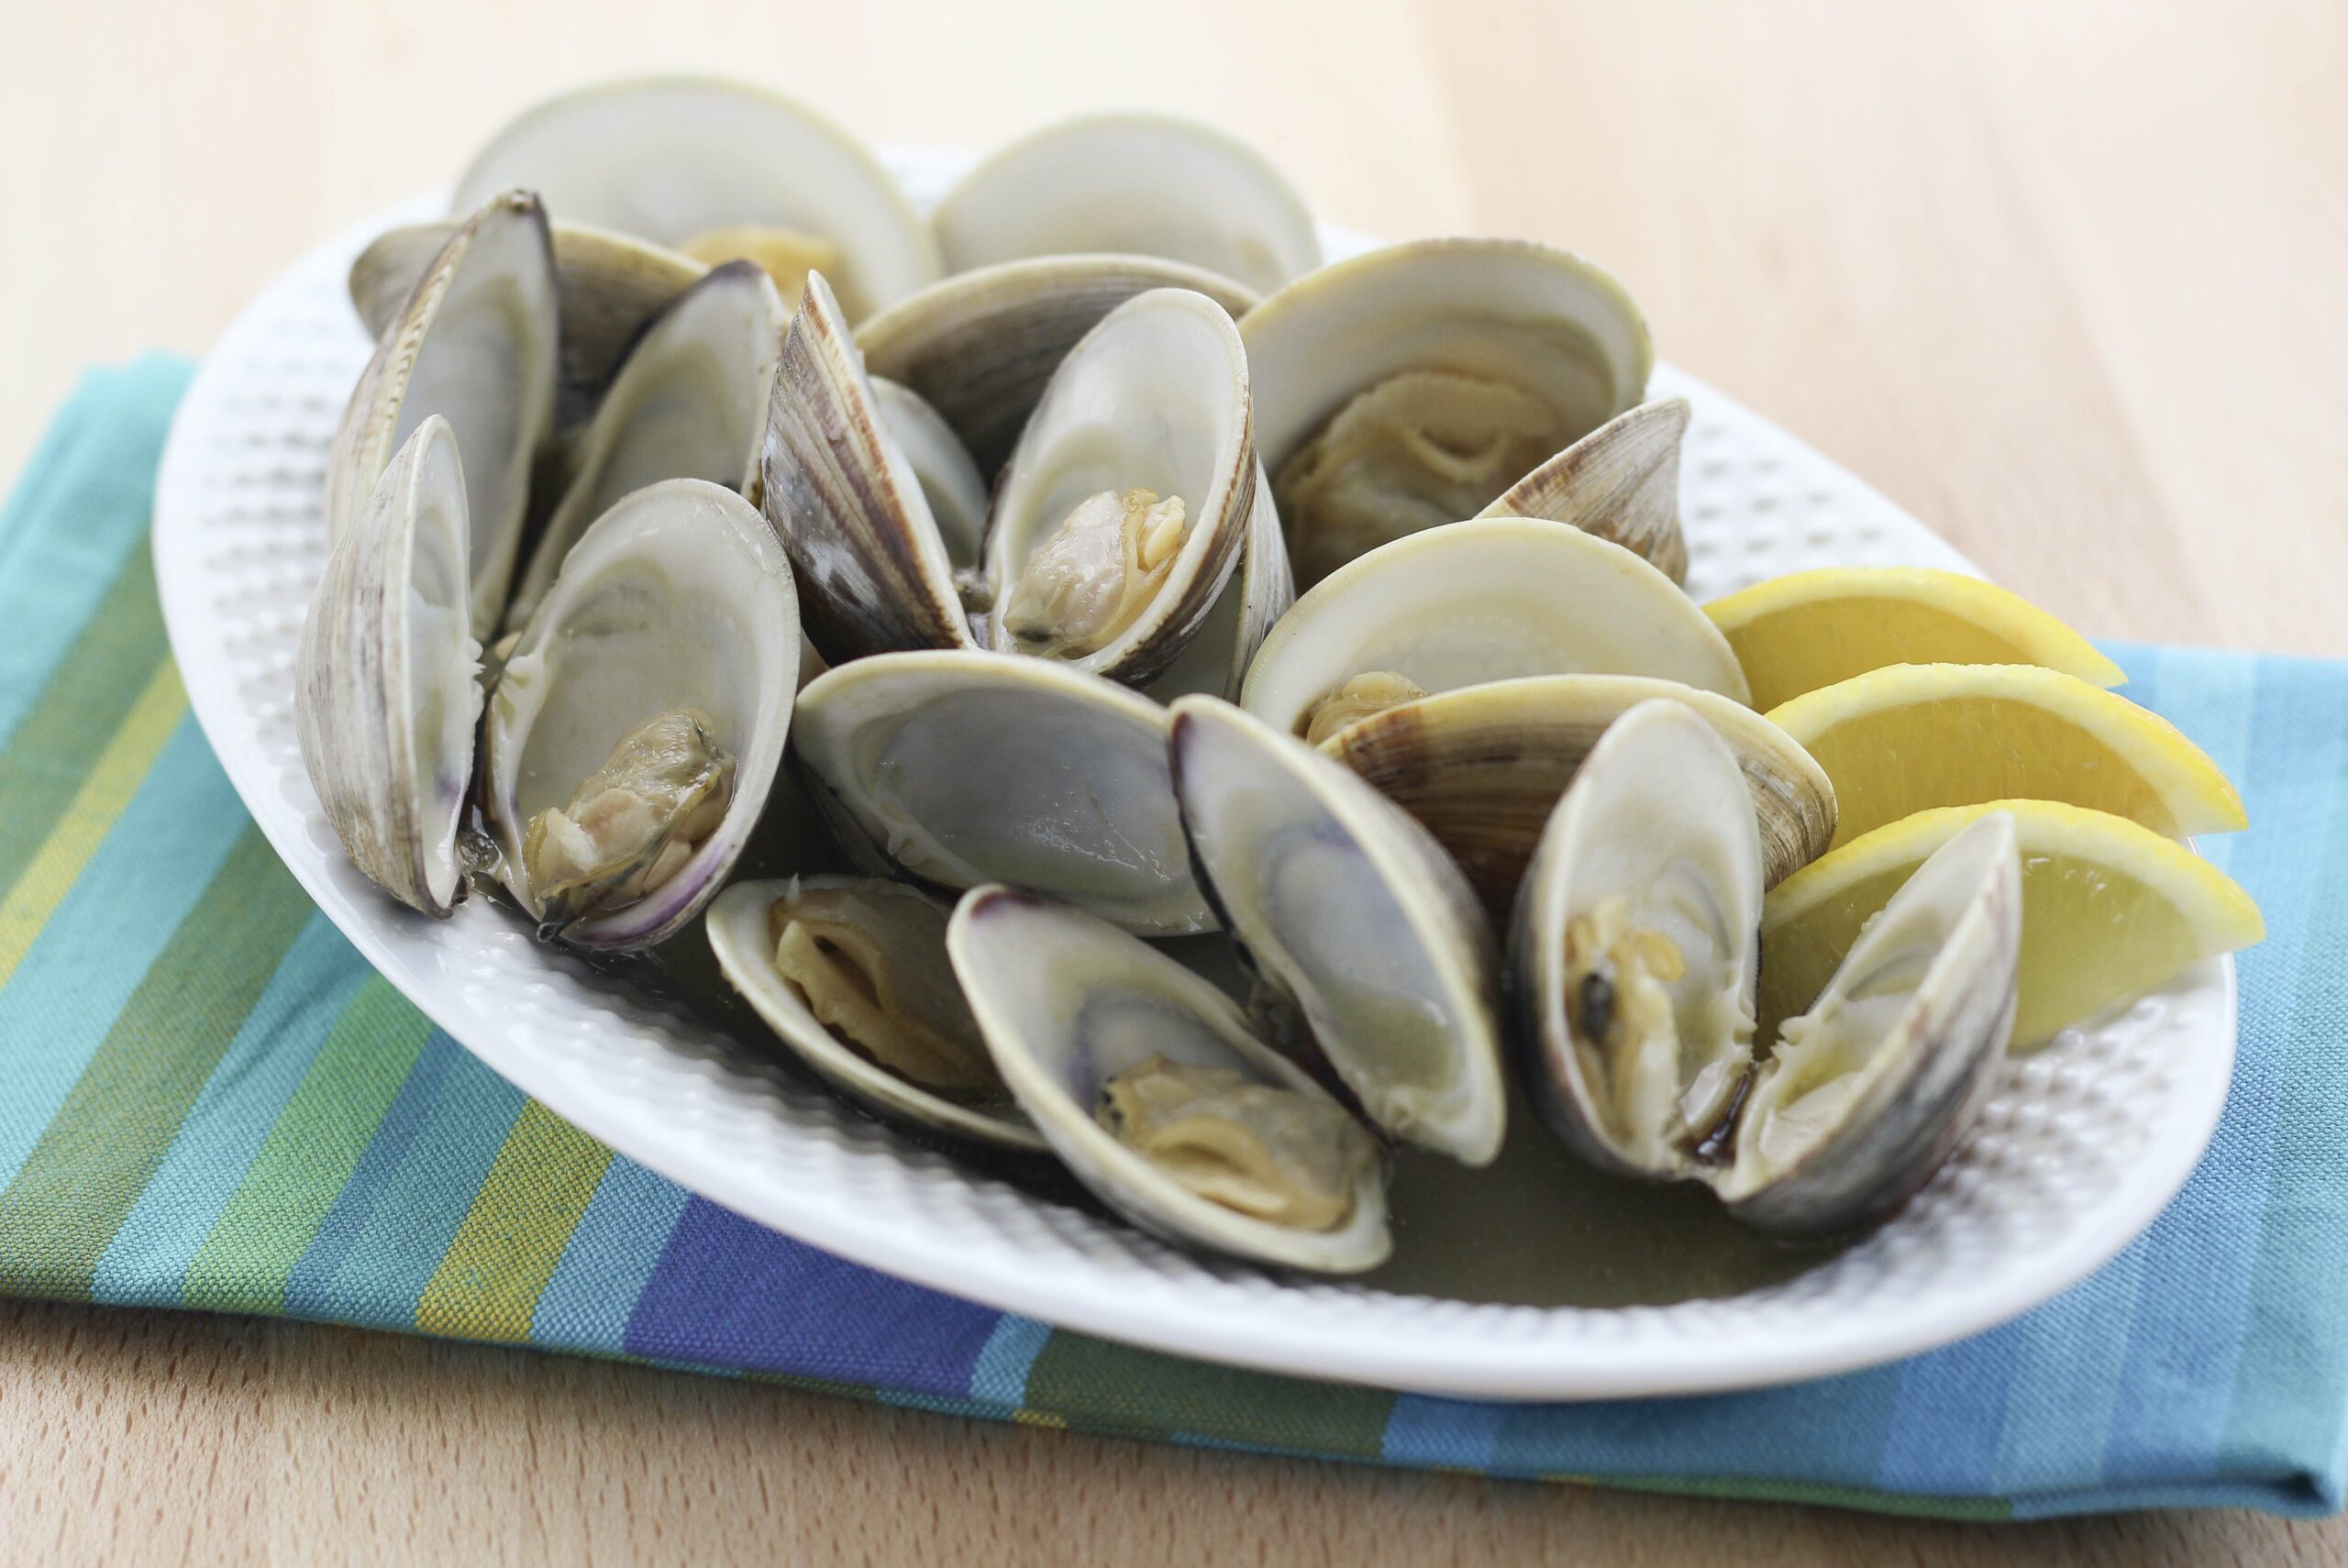 Steamed clams.